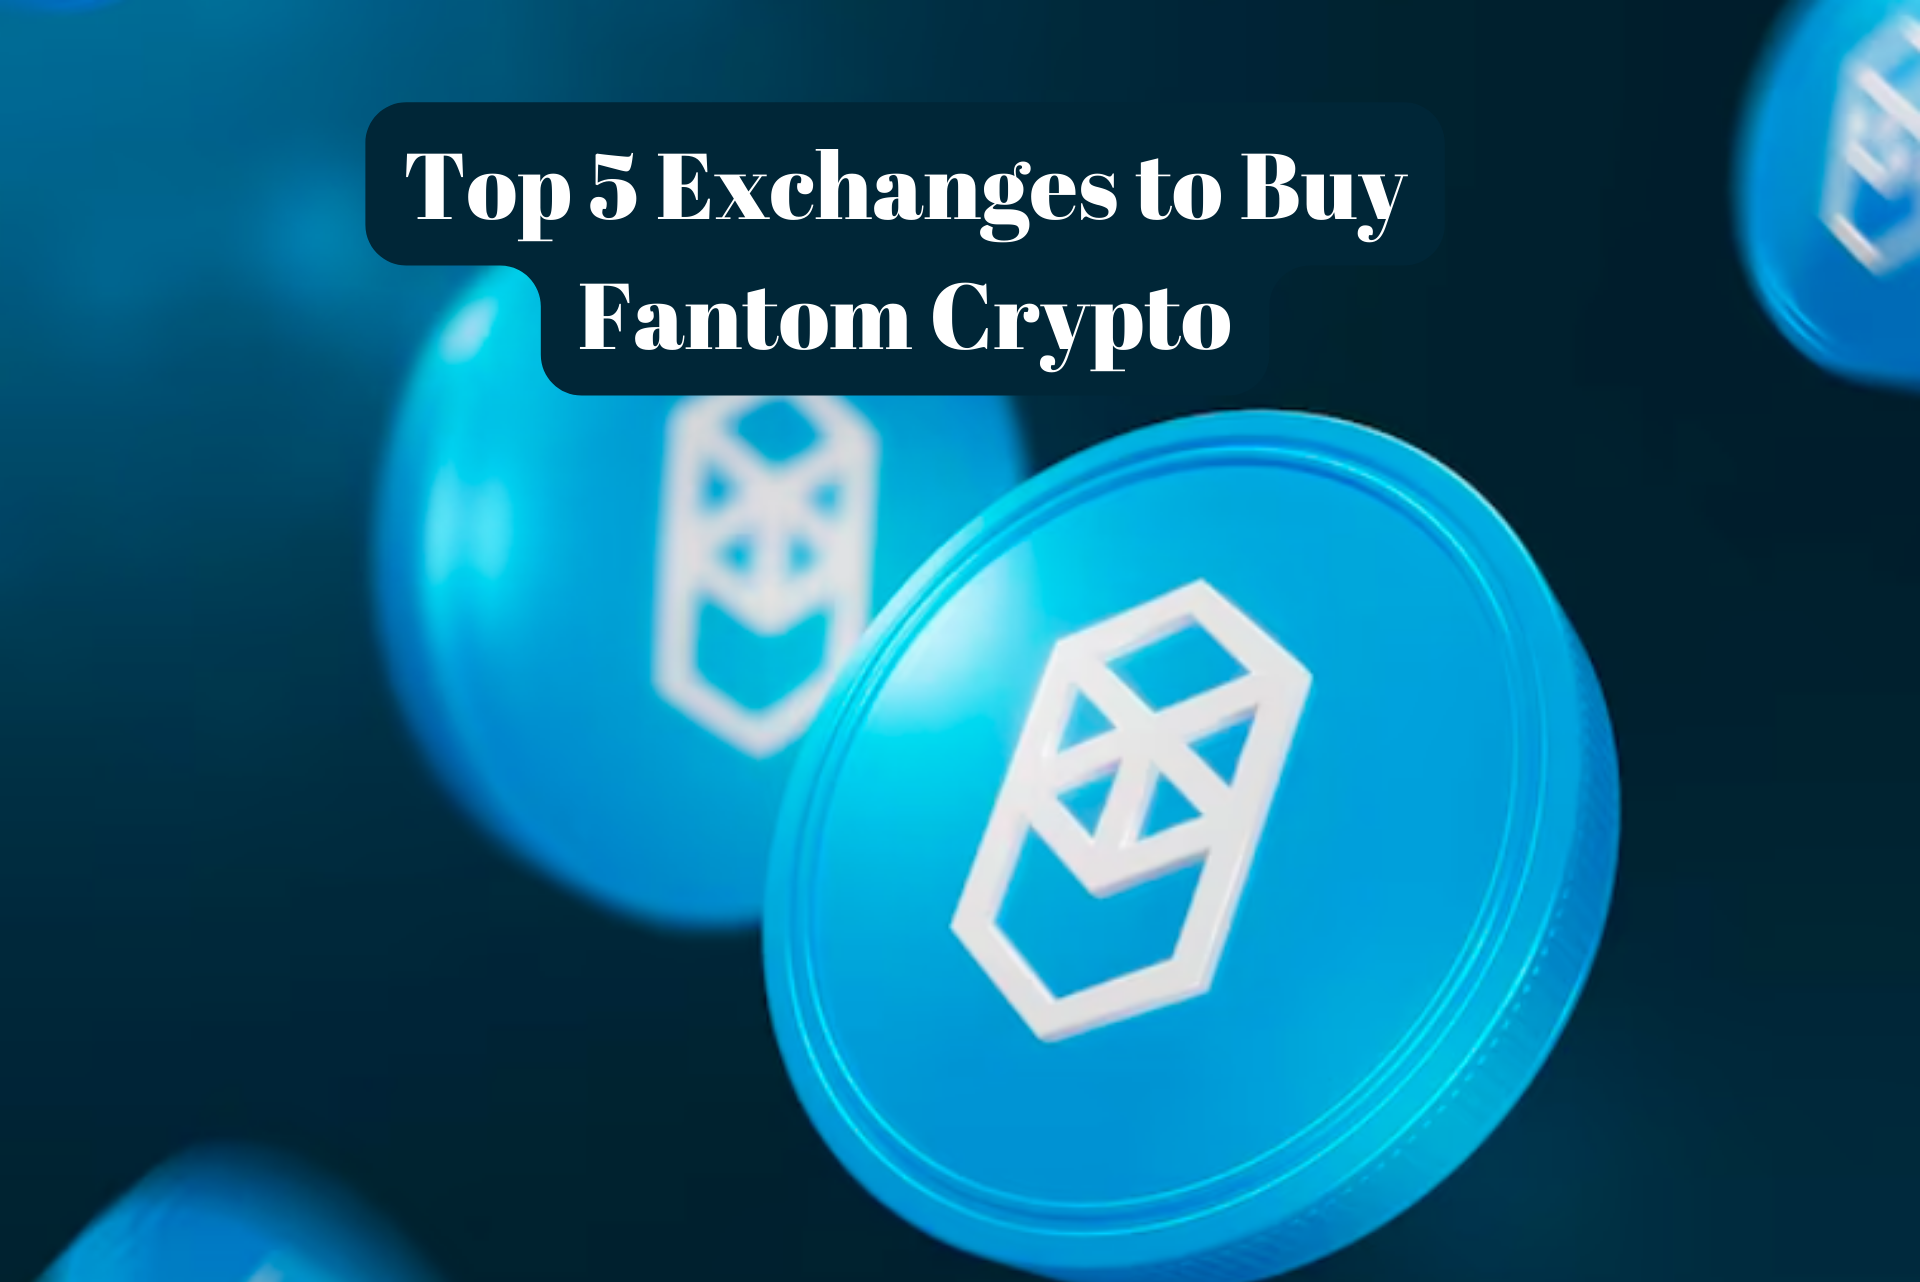 Top 5 Exchanges to Buy Fantom Crypto